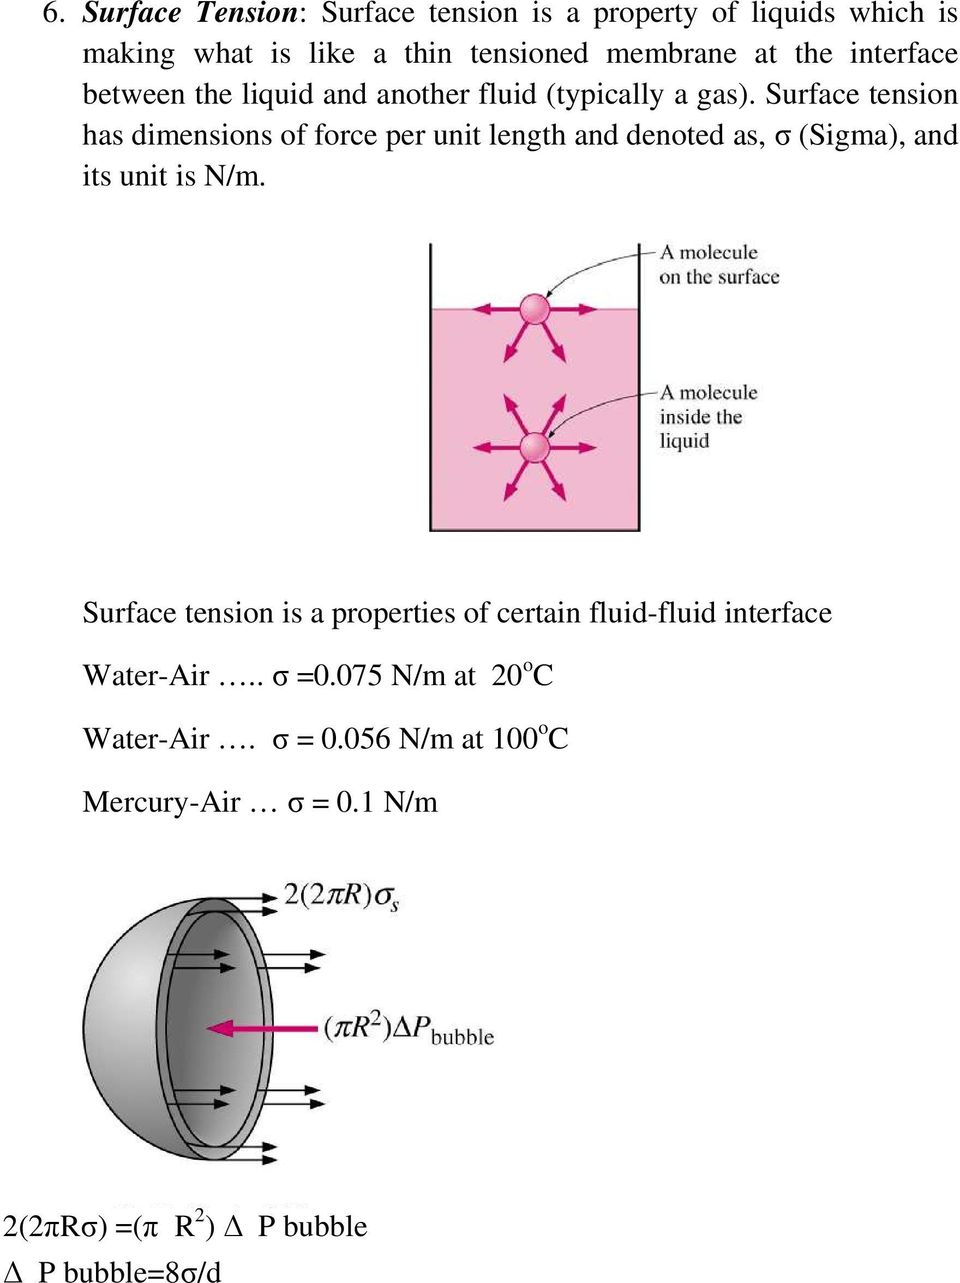 Surface tension has dimensions of force per unit length and denoted as, σ (Sigma), and its unit is N/m.